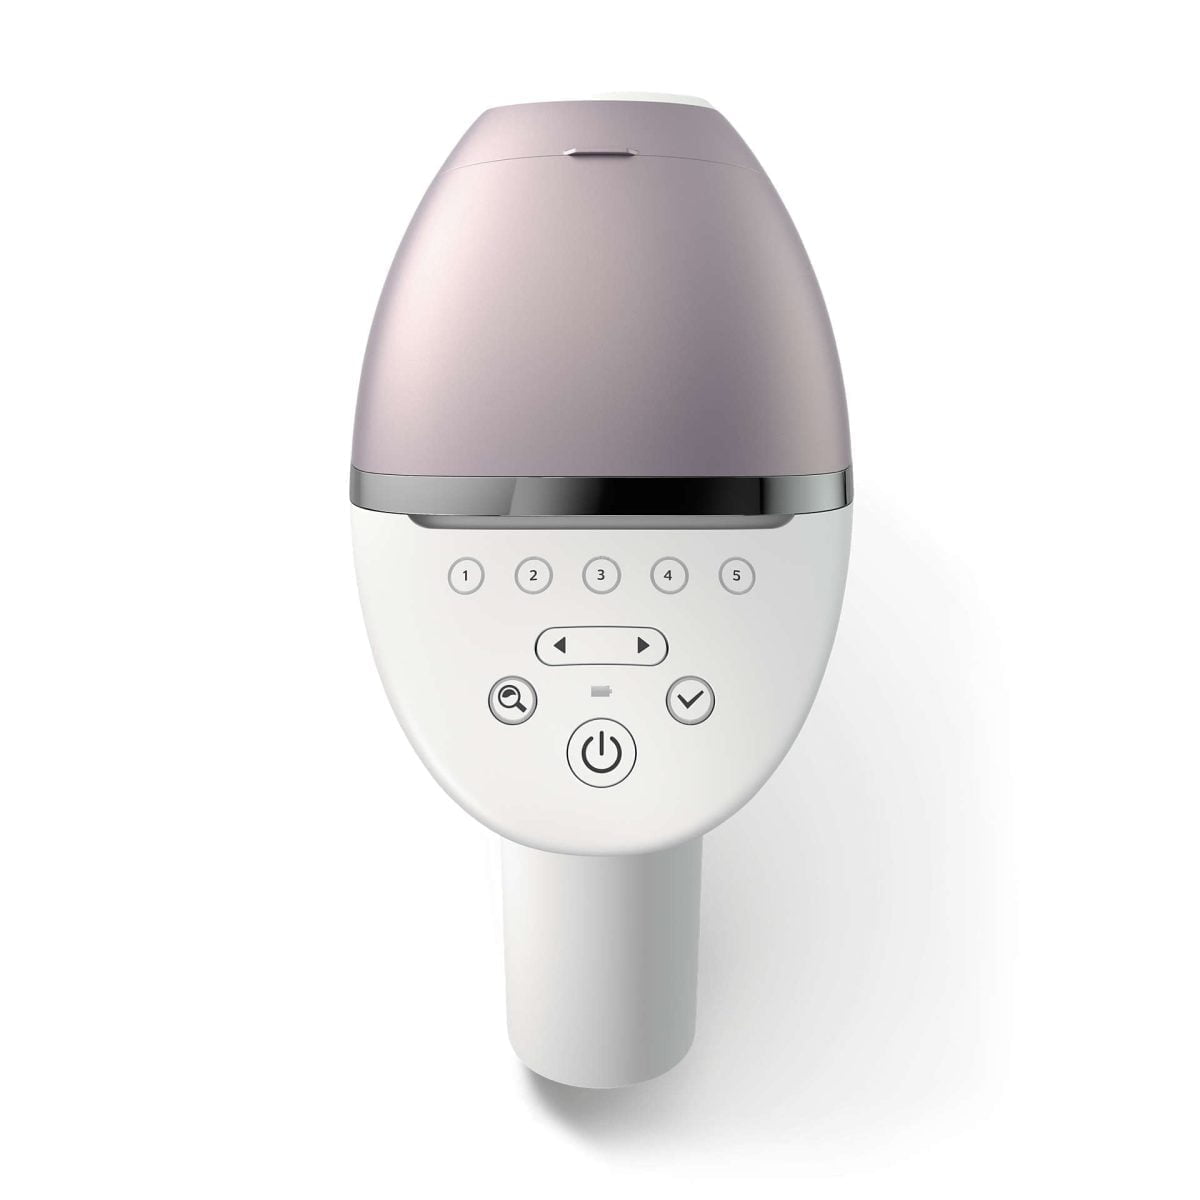 Da3A73Fd351148D98C1Bab5A00825C7B Philips Philips Lumea Prestige, The Most Powerful Ipl Yet, Designed For Your Body'S Curves And Easiest At-Home Experience. Uniquely Curved, Intelligent Attachments Perfectly Fit Your Curves And Adapt The Treatment Programs For Each Body Area. &Lt;H1&Gt;About The Product&Lt;/H1&Gt; &Lt;Ul&Gt; &Lt;Li&Gt;&Lt;Span Class=&Quot;A-List-Item&Quot;&Gt;Most Effective Ipl With Senseiq Technology&Lt;/Span&Gt;&Lt;/Li&Gt; &Lt;Li&Gt;&Lt;Span Class=&Quot;A-List-Item&Quot;&Gt;Enjoy Up To 8 Weeks Of Smooth, Hair-Free Skin&Lt;/Span&Gt;&Lt;/Li&Gt; &Lt;Li&Gt;&Lt;Span Class=&Quot;A-List-Item&Quot;&Gt;With Smartskin Sensor&Lt;/Span&Gt;&Lt;/Li&Gt; &Lt;Li&Gt;&Lt;Span Class=&Quot;A-List-Item&Quot;&Gt;Use Either Cordless Or Corded&Lt;/Span&Gt;&Lt;/Li&Gt; &Lt;Li&Gt;&Lt;Span Class=&Quot;A-List-Item&Quot;&Gt;Designed For Convenient Treatment At Home&Lt;/Span&Gt;&Lt;/Li&Gt; &Lt;Li&Gt;&Lt;Span Class=&Quot;A-List-Item&Quot;&Gt;Intelligent Attachments Perfectly Fit Every Curve Of Your Body&Lt;/Span&Gt;&Lt;/Li&Gt; &Lt;Li&Gt;&Lt;Span Class=&Quot;A-List-Item&Quot;&Gt;Suitable For A Wide Range Of Hair And Skin Types&Lt;/Span&Gt;&Lt;/Li&Gt; &Lt;/Ul&Gt; Intelligent Attachments Designed For Best Results &Lt;Ol&Gt; &Lt;Li&Gt;3 Intelligent Attachments&Lt;/Li&Gt; &Lt;Li&Gt;Precision Areas, Body, Face&Lt;/Li&Gt; &Lt;Li&Gt;With Smartskin Sensor&Lt;/Li&Gt; &Lt;Li&Gt;Both Cordless And Corded Use&Lt;/Li&Gt; &Lt;/Ol&Gt; Philips Lumea Prestige Ipl Hair Removal | Bri954